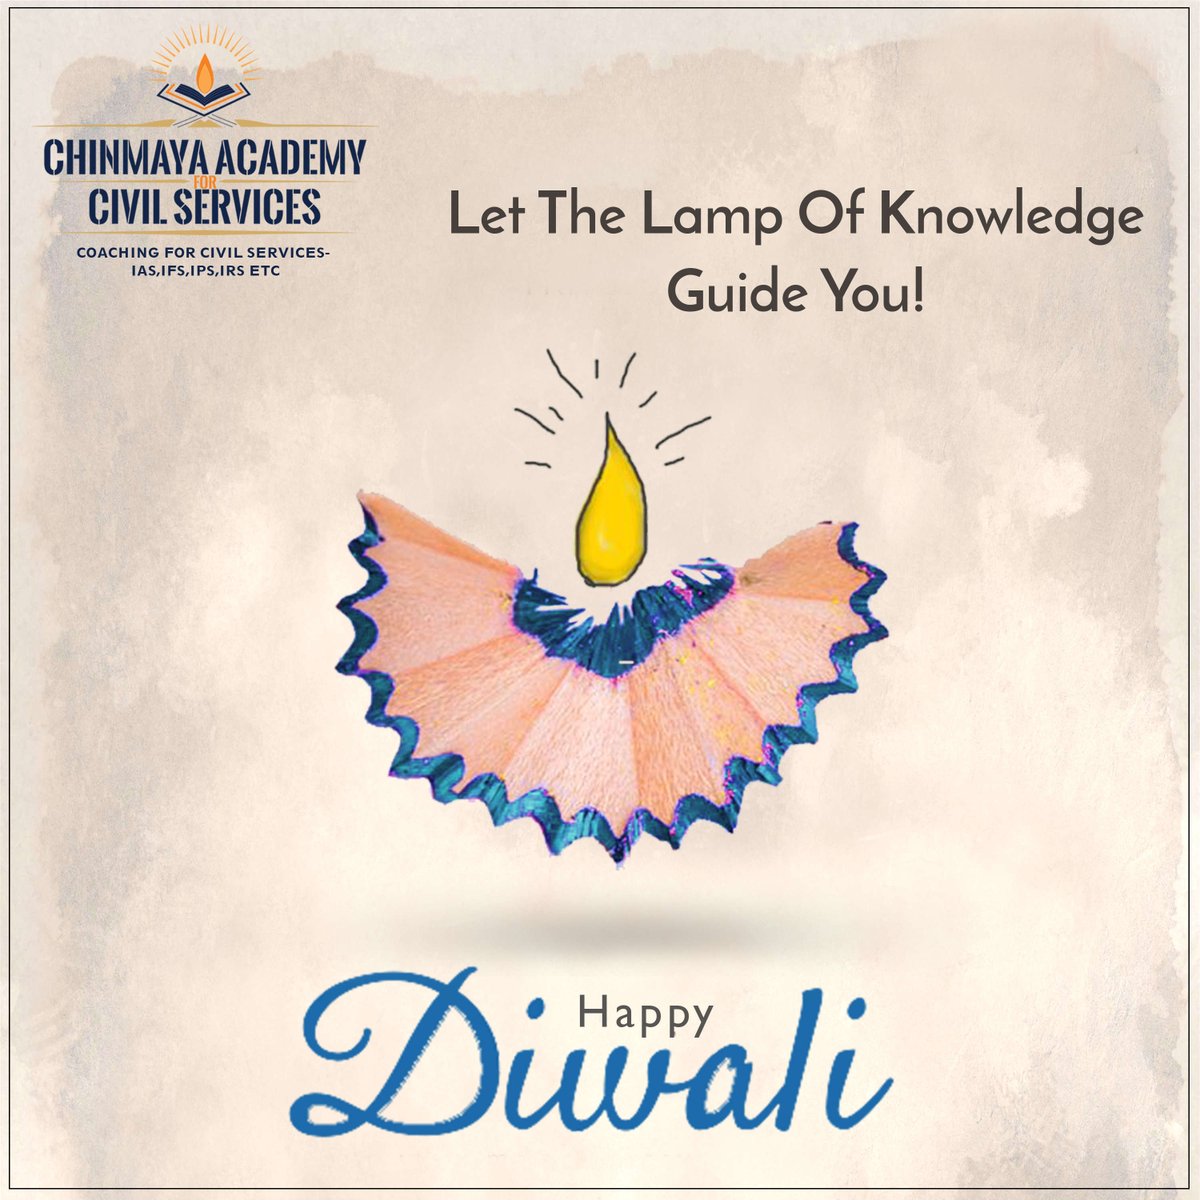 This Diwali, here is wishing each one of you that the glowing light of knowledge guide you to the path of righteousness, good virtue, and success! #HappyDiwali!
#chinmayaiasacademy #iascoaching #iascoachingprograms #chinmayaacademy #chinmayaias